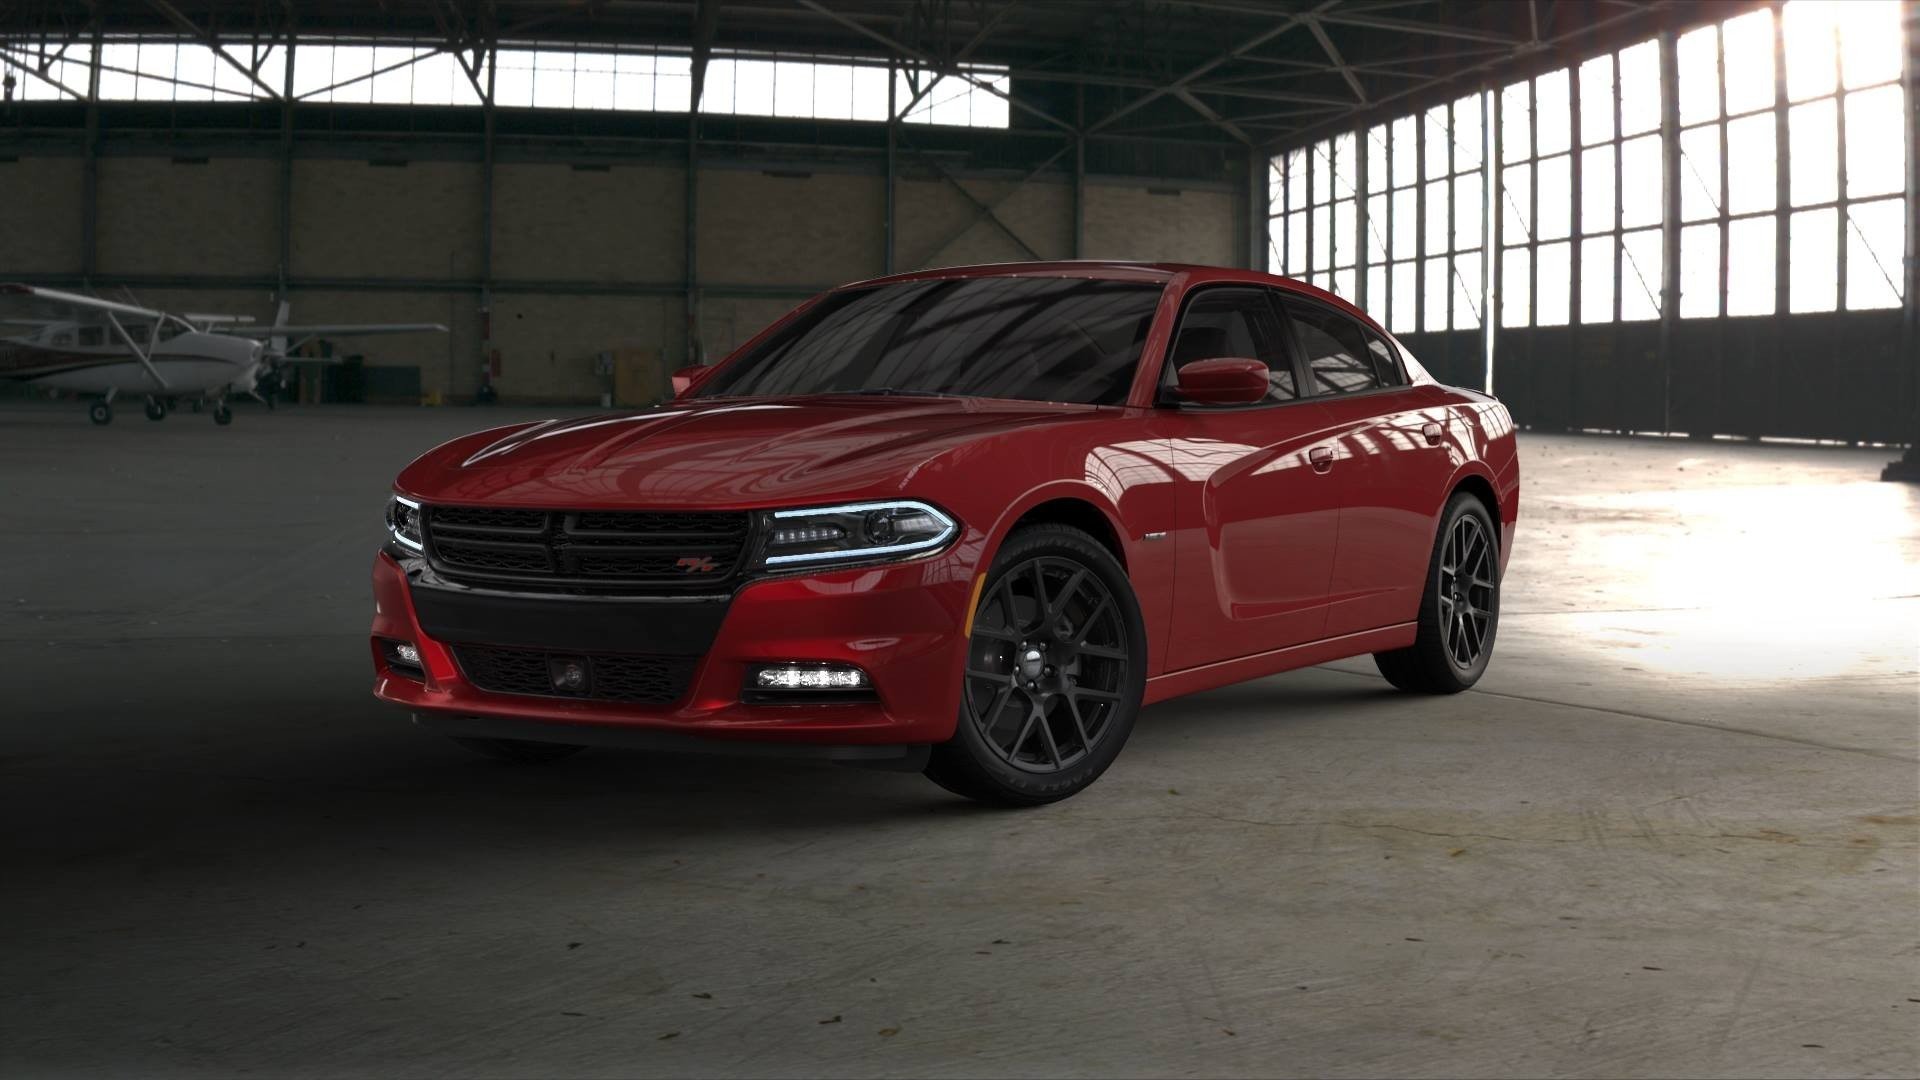 1920x1080 Dodge Charger Hellcat Cars